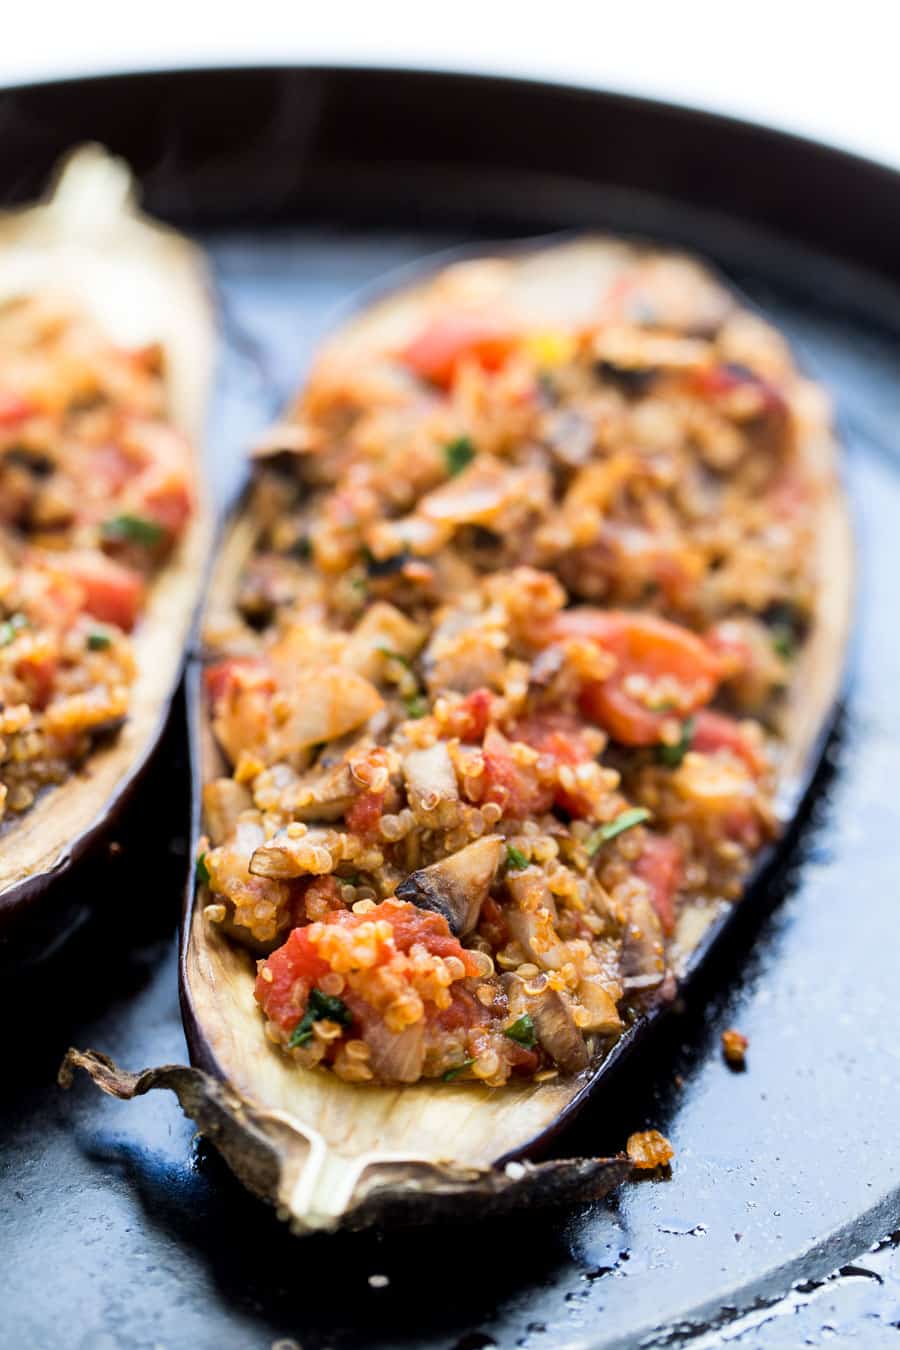 How to make THE BEST Quinoa Stuffed Eggplant -- in just 30 MINUTES!